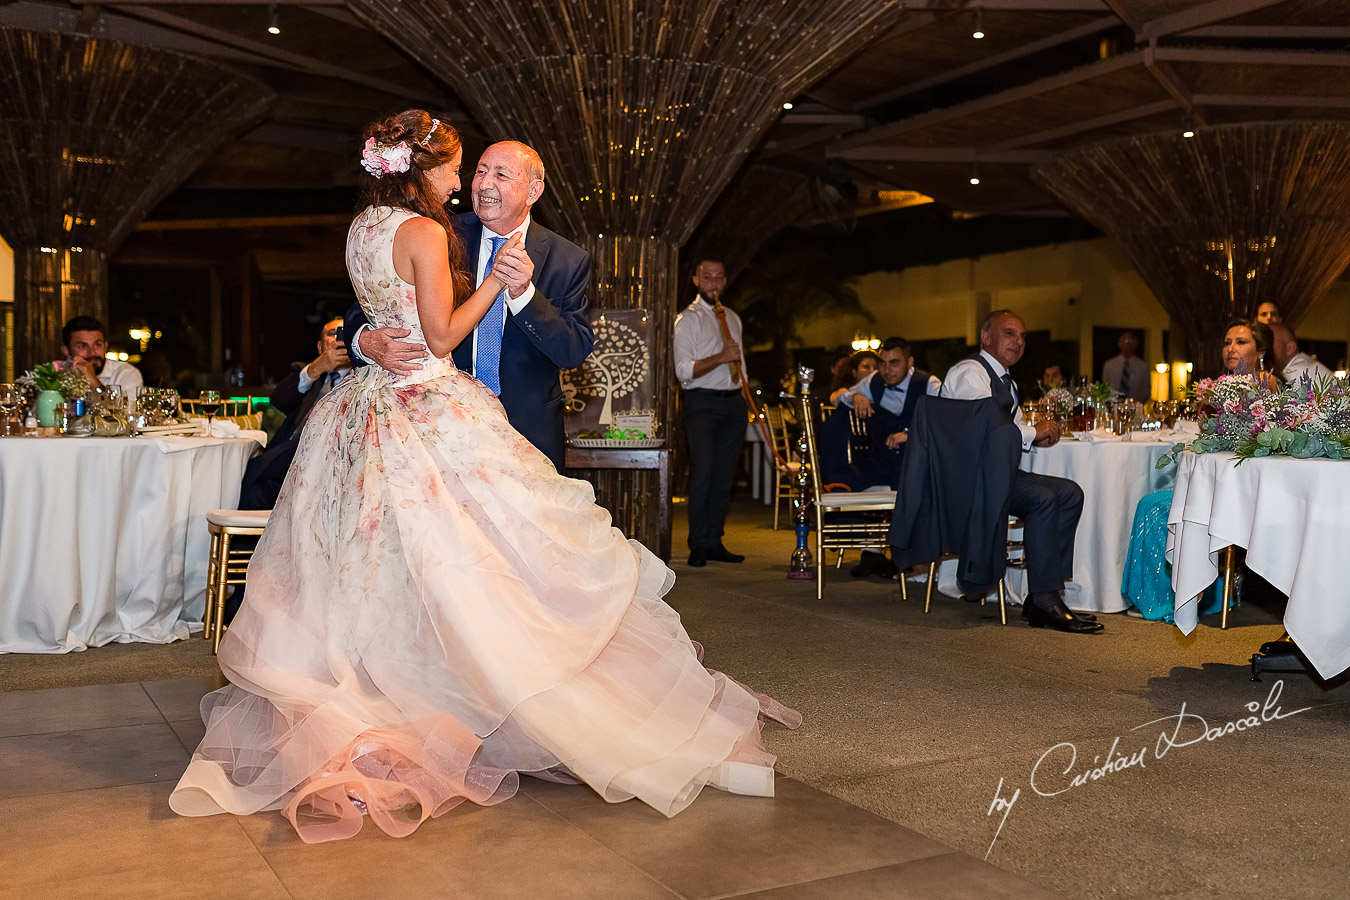 Bride dancing with her father, an emotional moment photographed as part of an Exclusive Wedding photography at Grand Resort Limassol, captured by Cyprus Wedding Photographer Cristian Dascalu.